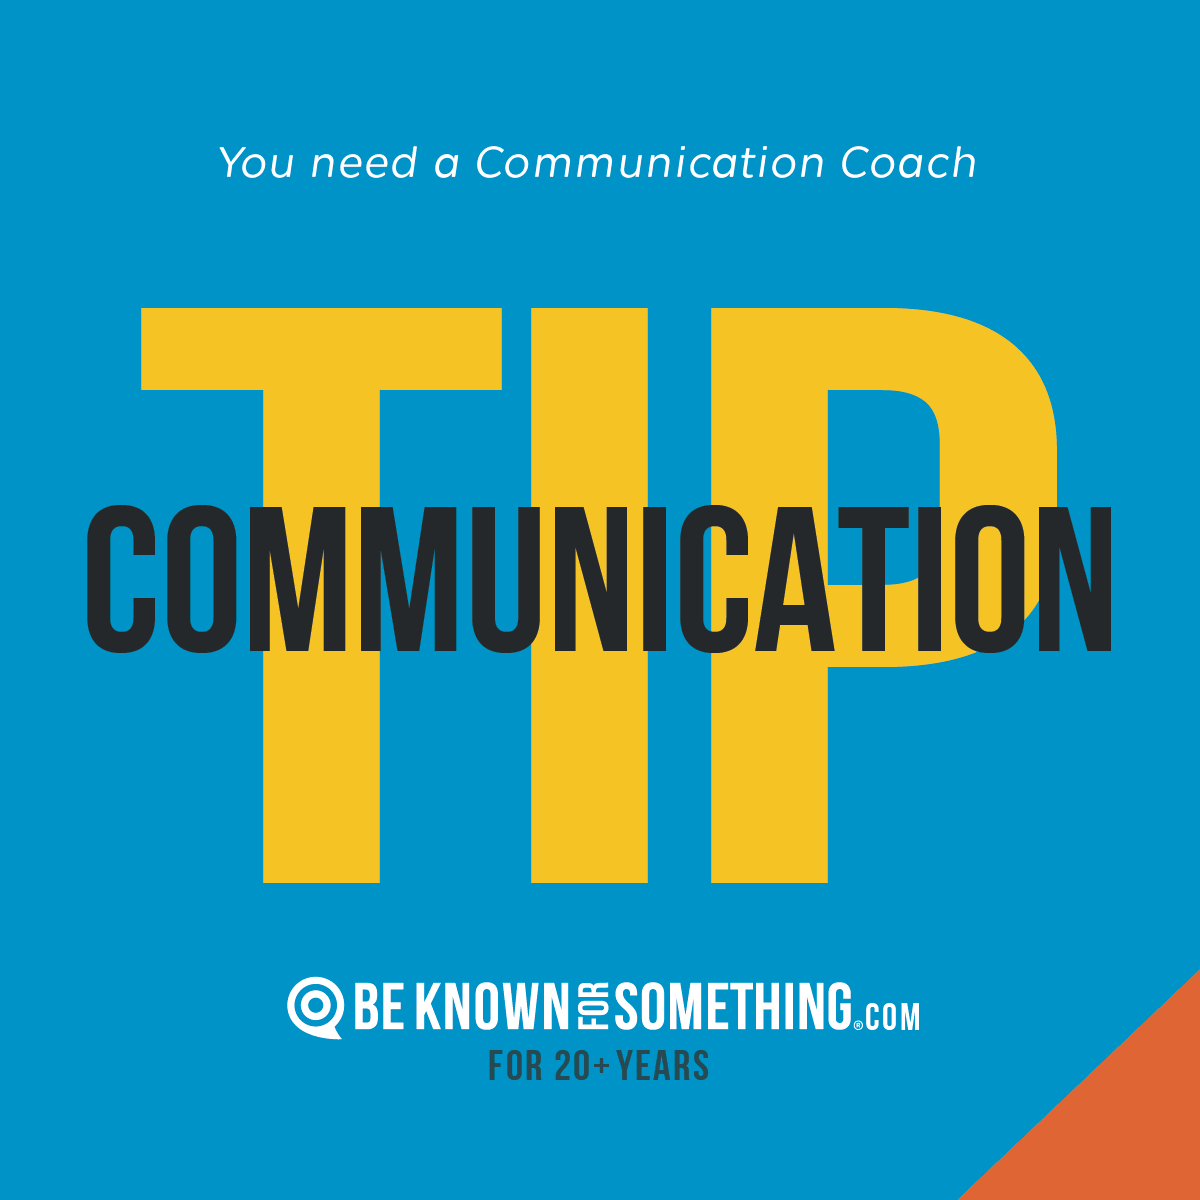 #Communication #Tip: ✅ Lead Ministry Online. 

Quick Read (5 Tips for Leading a Ministry Online): ow.ly/mhYI50OsH0Q

#tips #beknownforsomething #churchcomm #churchcomms #church #leadership #pastor #communicationcoach